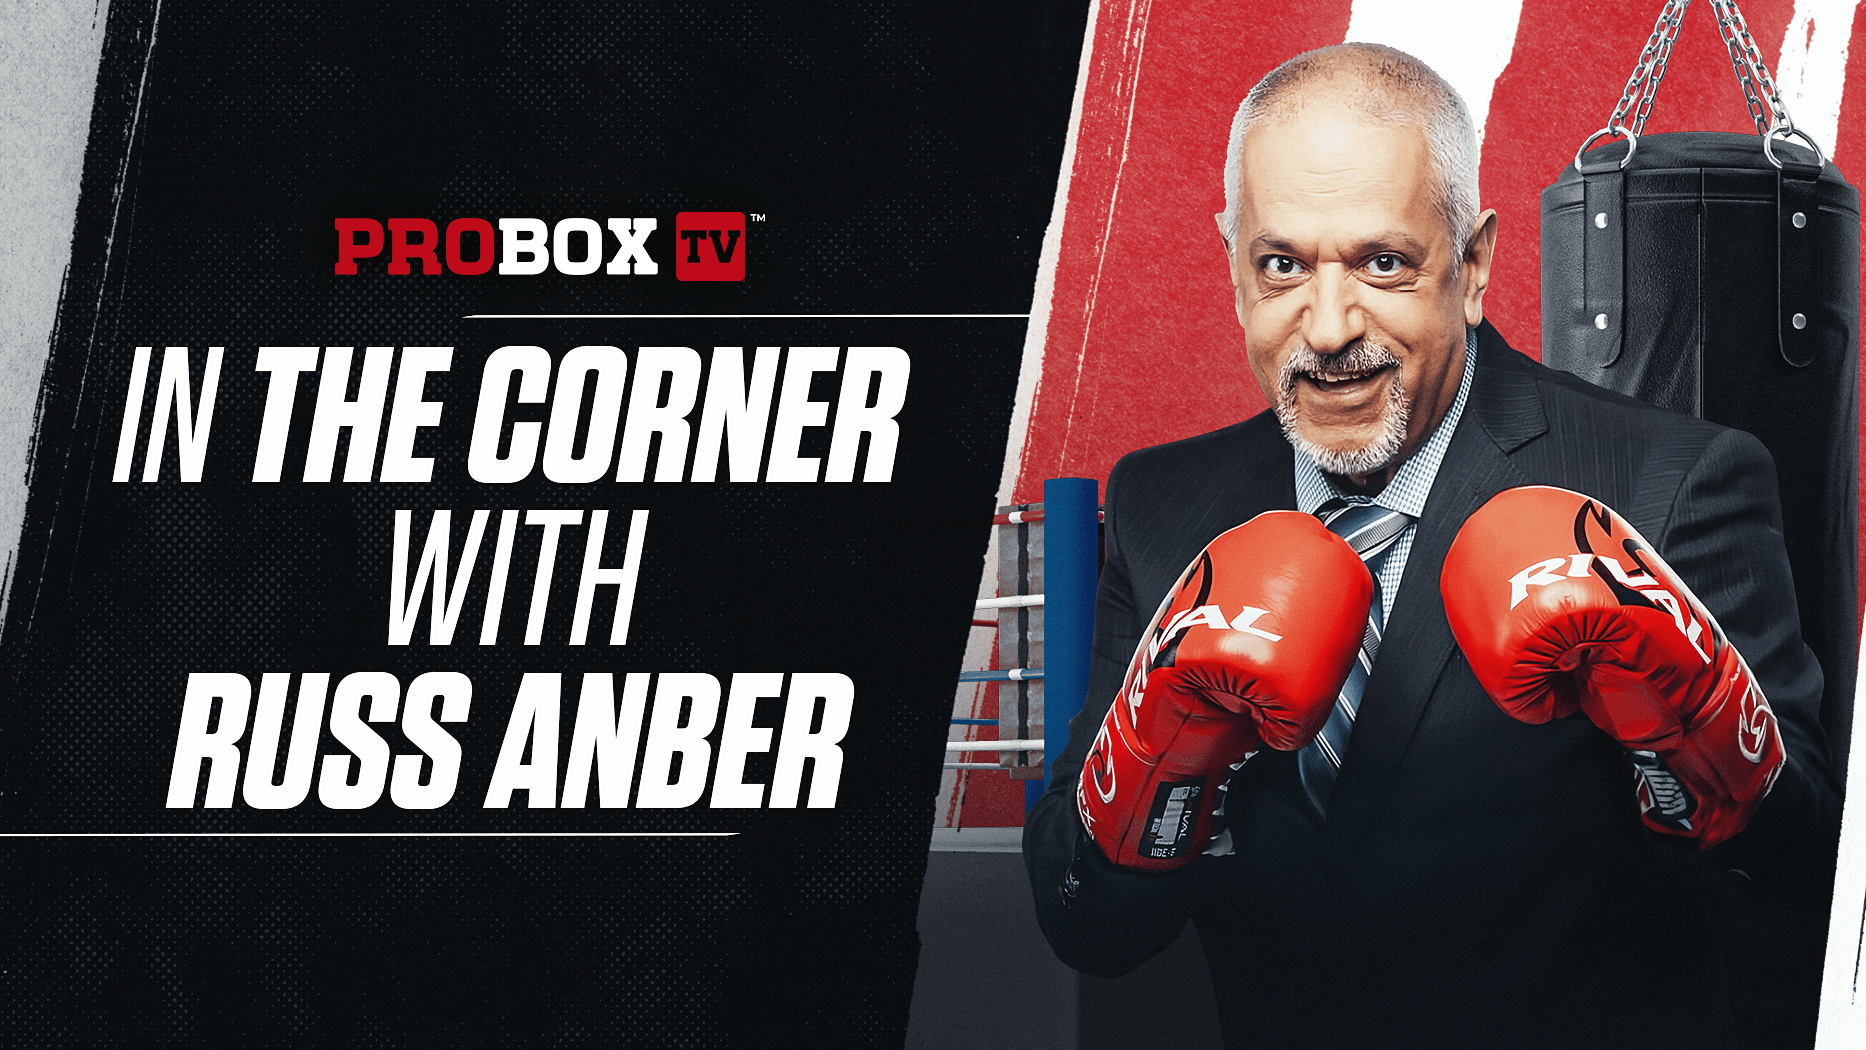 In The Corner with Russ Anber: the path to professional glory for great amateur Cruz has become easier